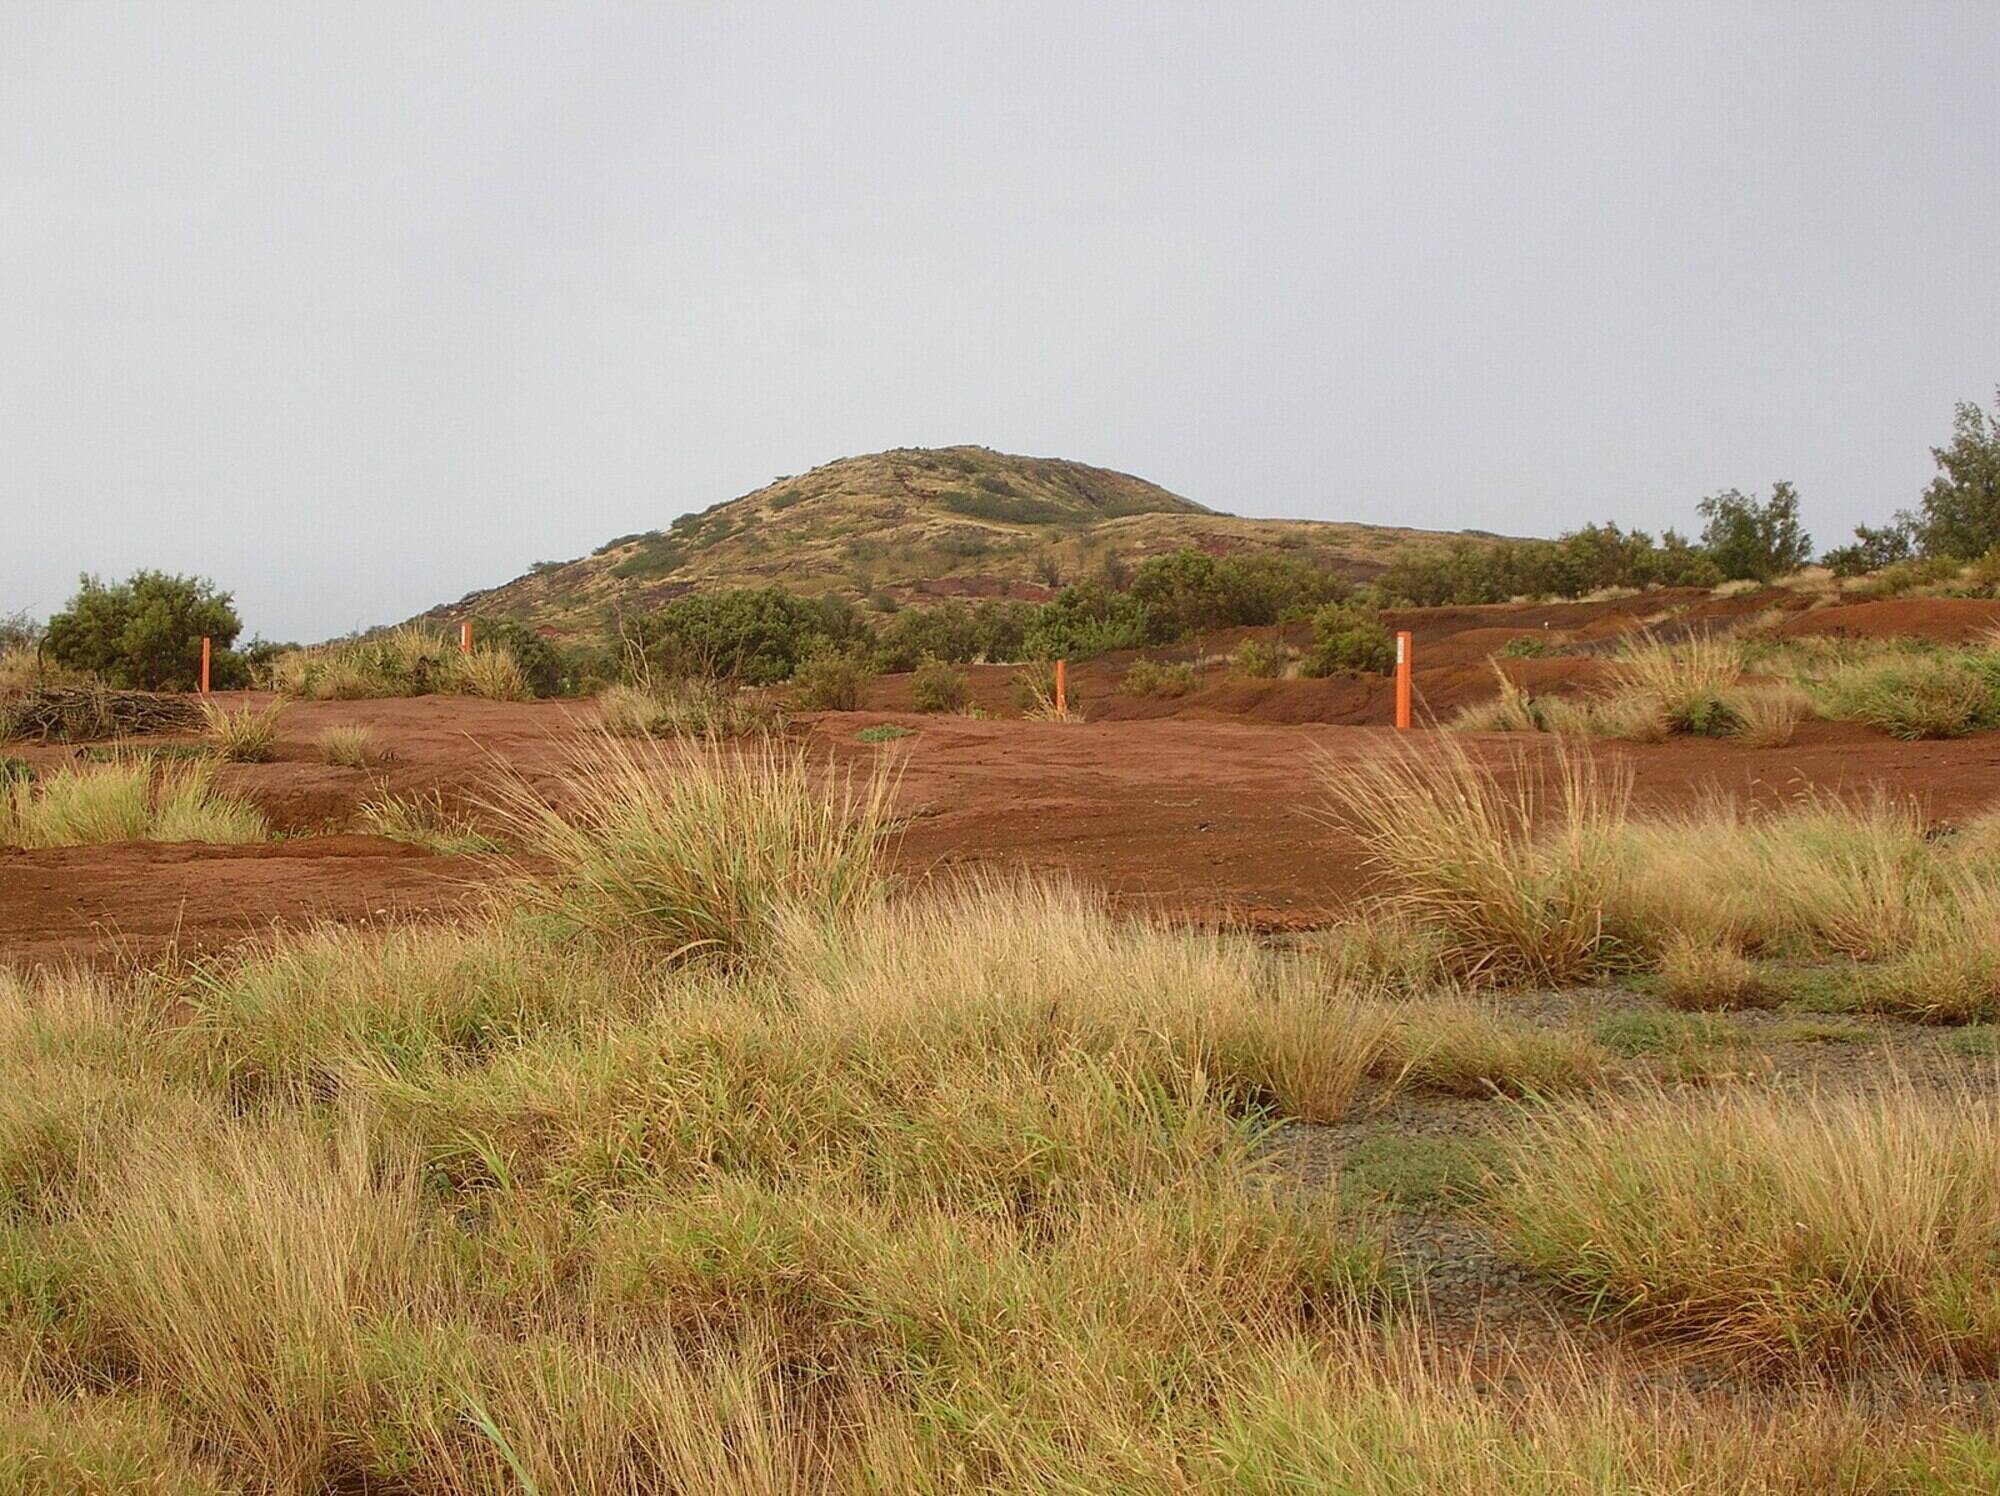 Photograph of a landscape on the island of Kahoolawe, Hawaiian Islands. In the foreground, tufts of tanglehead grass grow in red soil. A rounded hill covered with vegetation rises in the background.